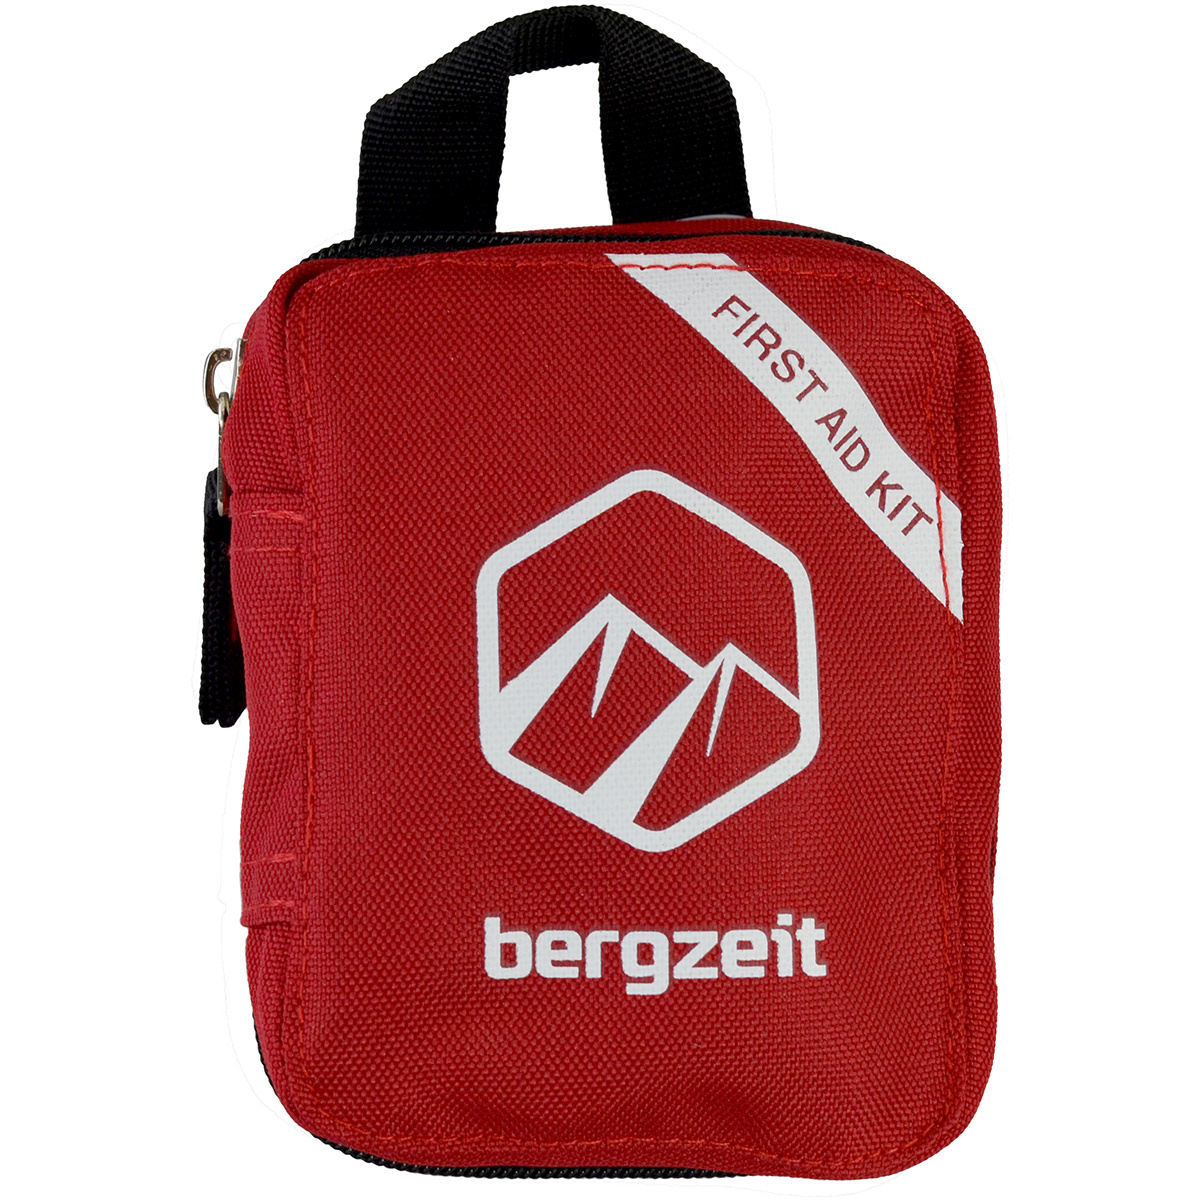 Image of LACD First Aid Kit Bergzeit